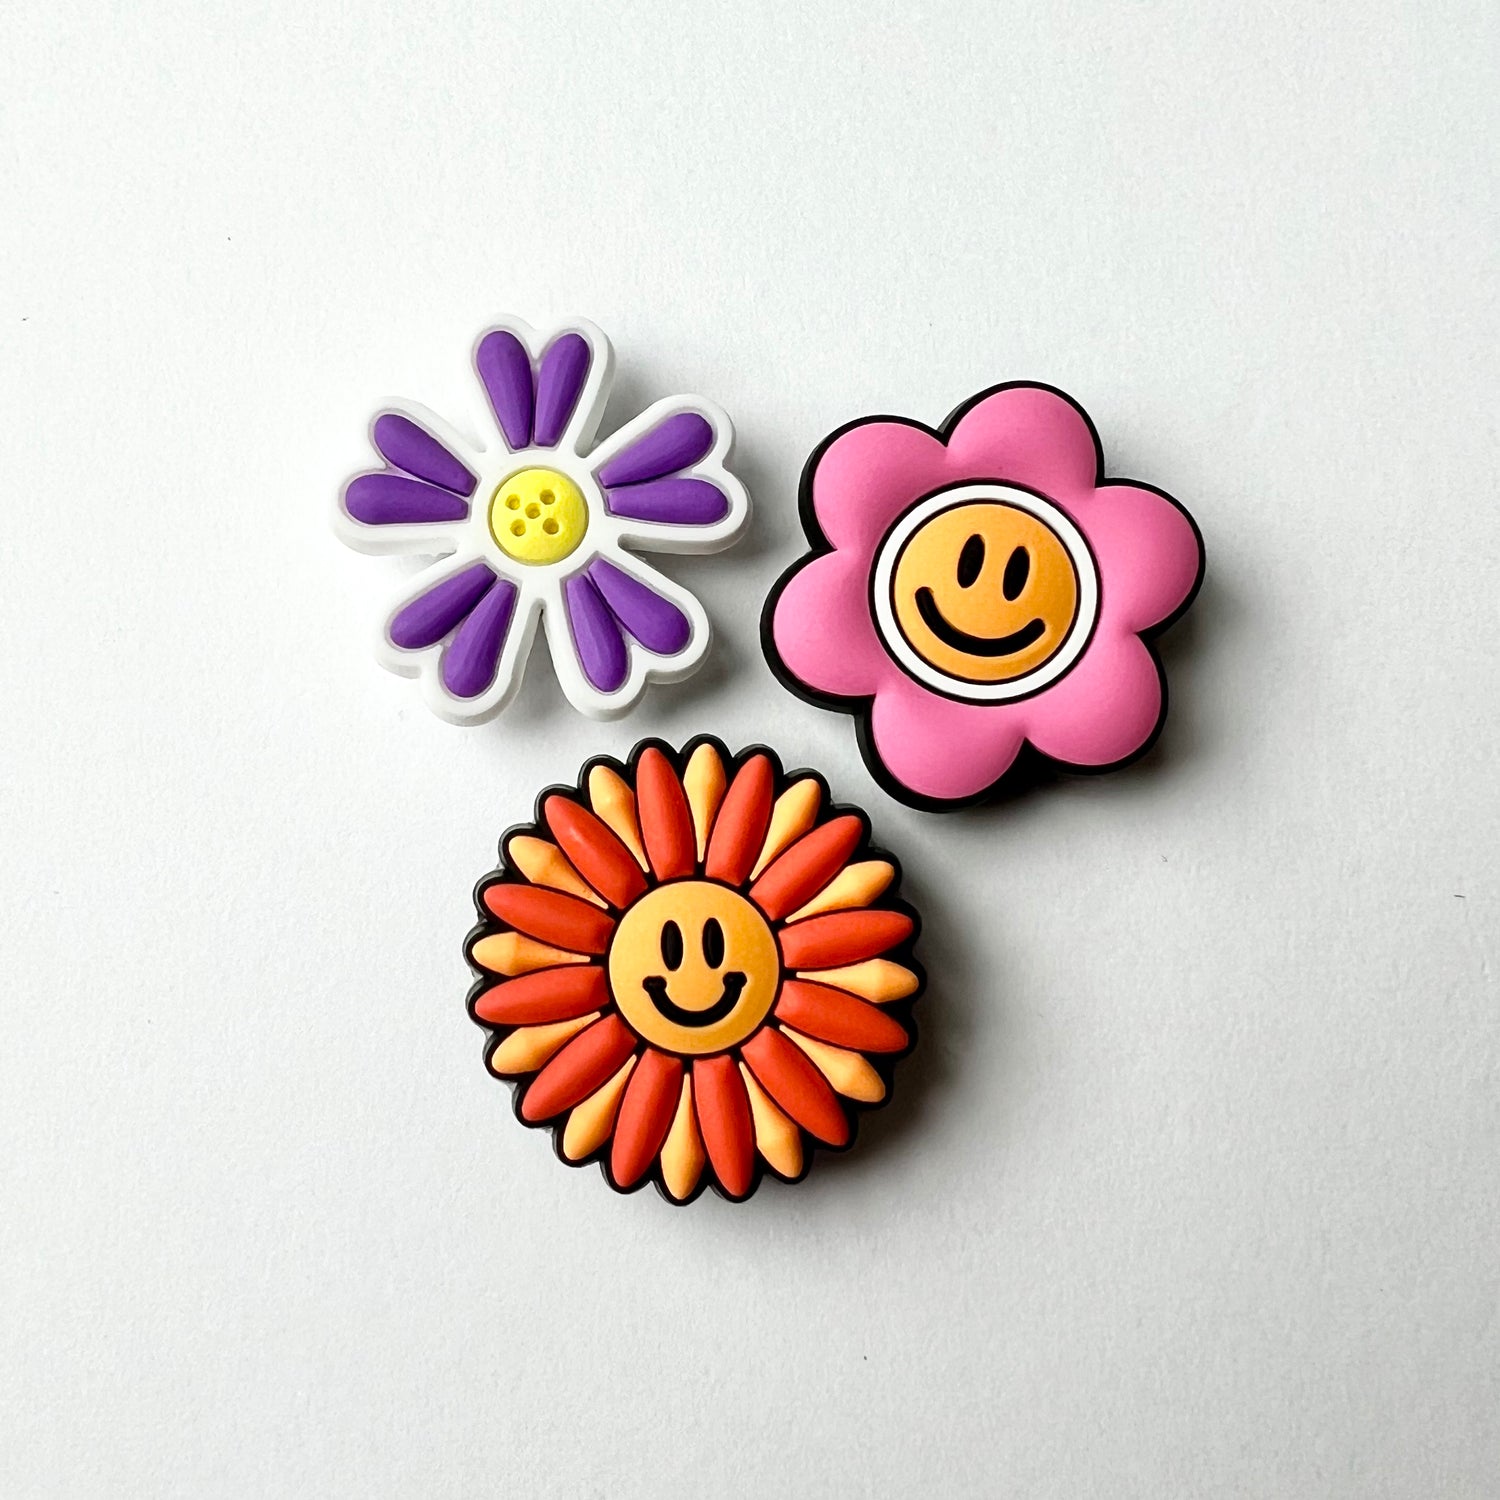 The Happy Flower Charms Pack